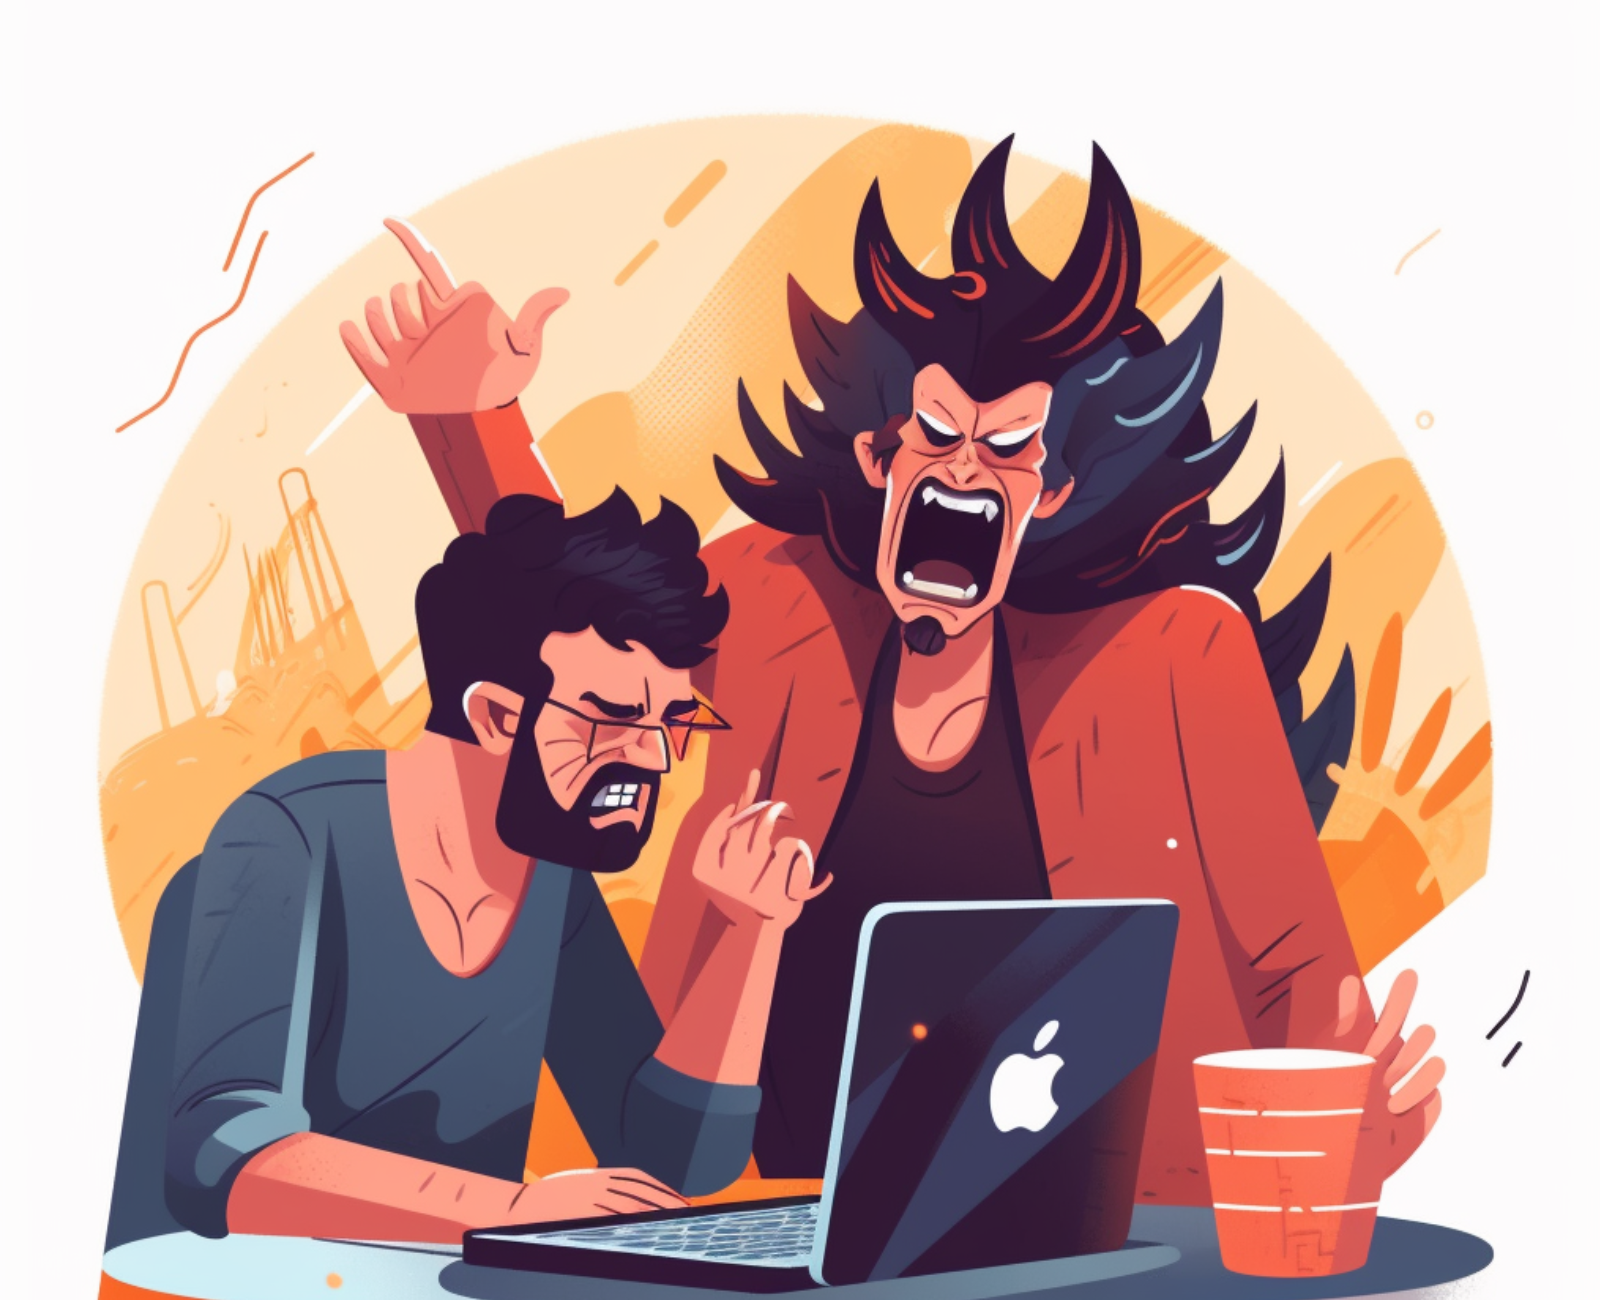 Angry client yelling at a web designer